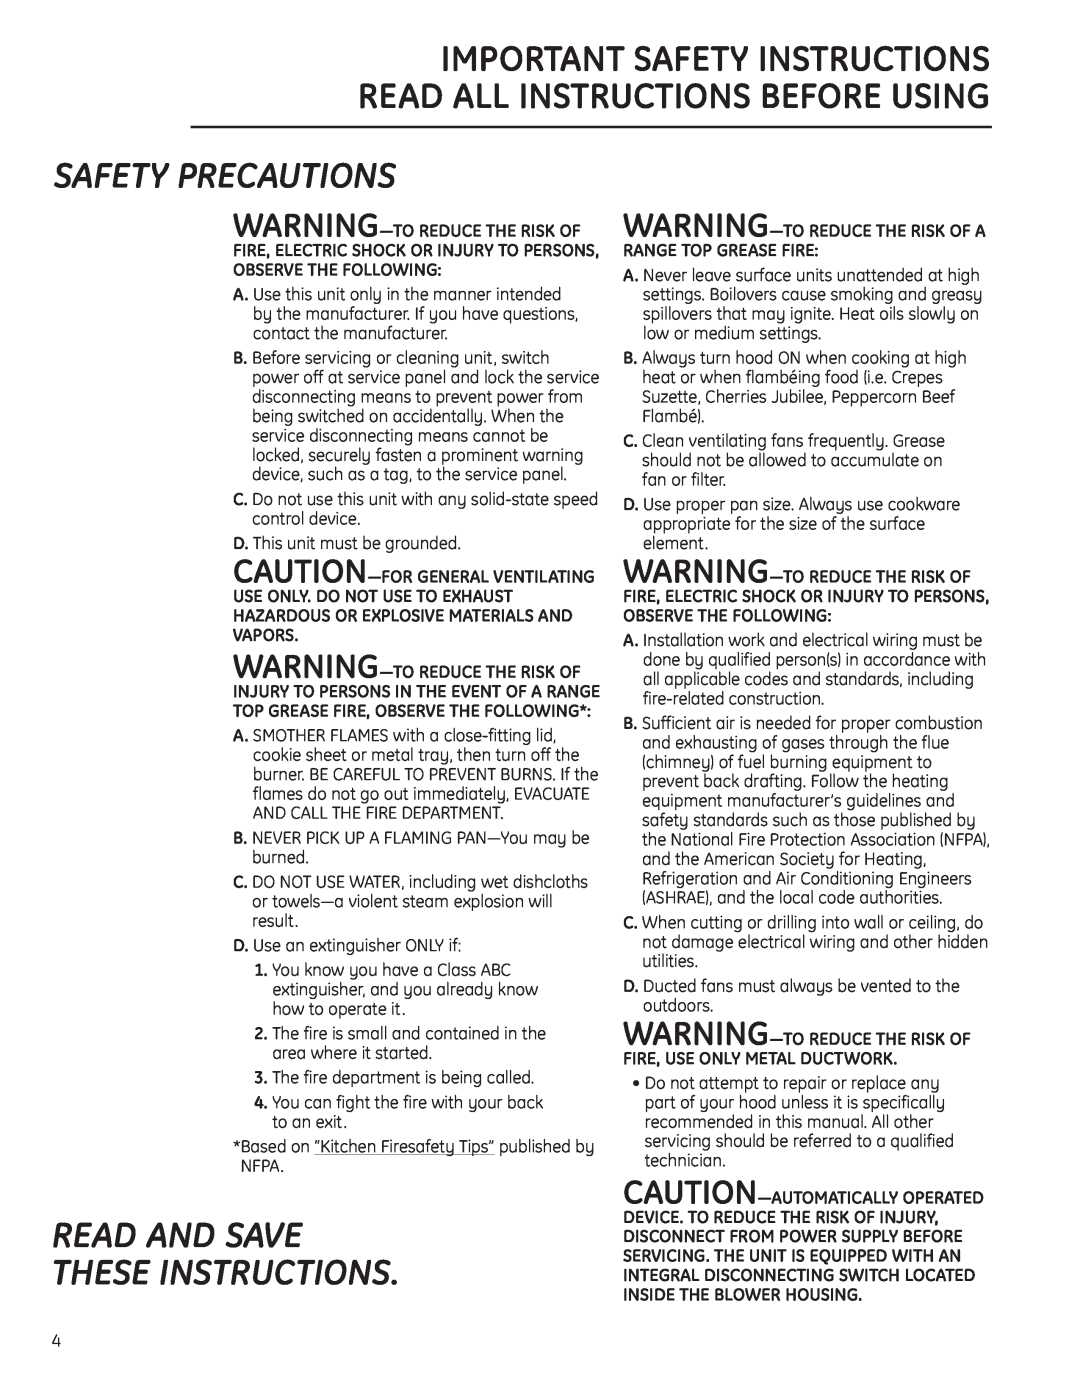 GE Monogram ZV900, ZV925 owner manual Safety Precautions, Read And Save These Instructions, Important Safety Instructions 